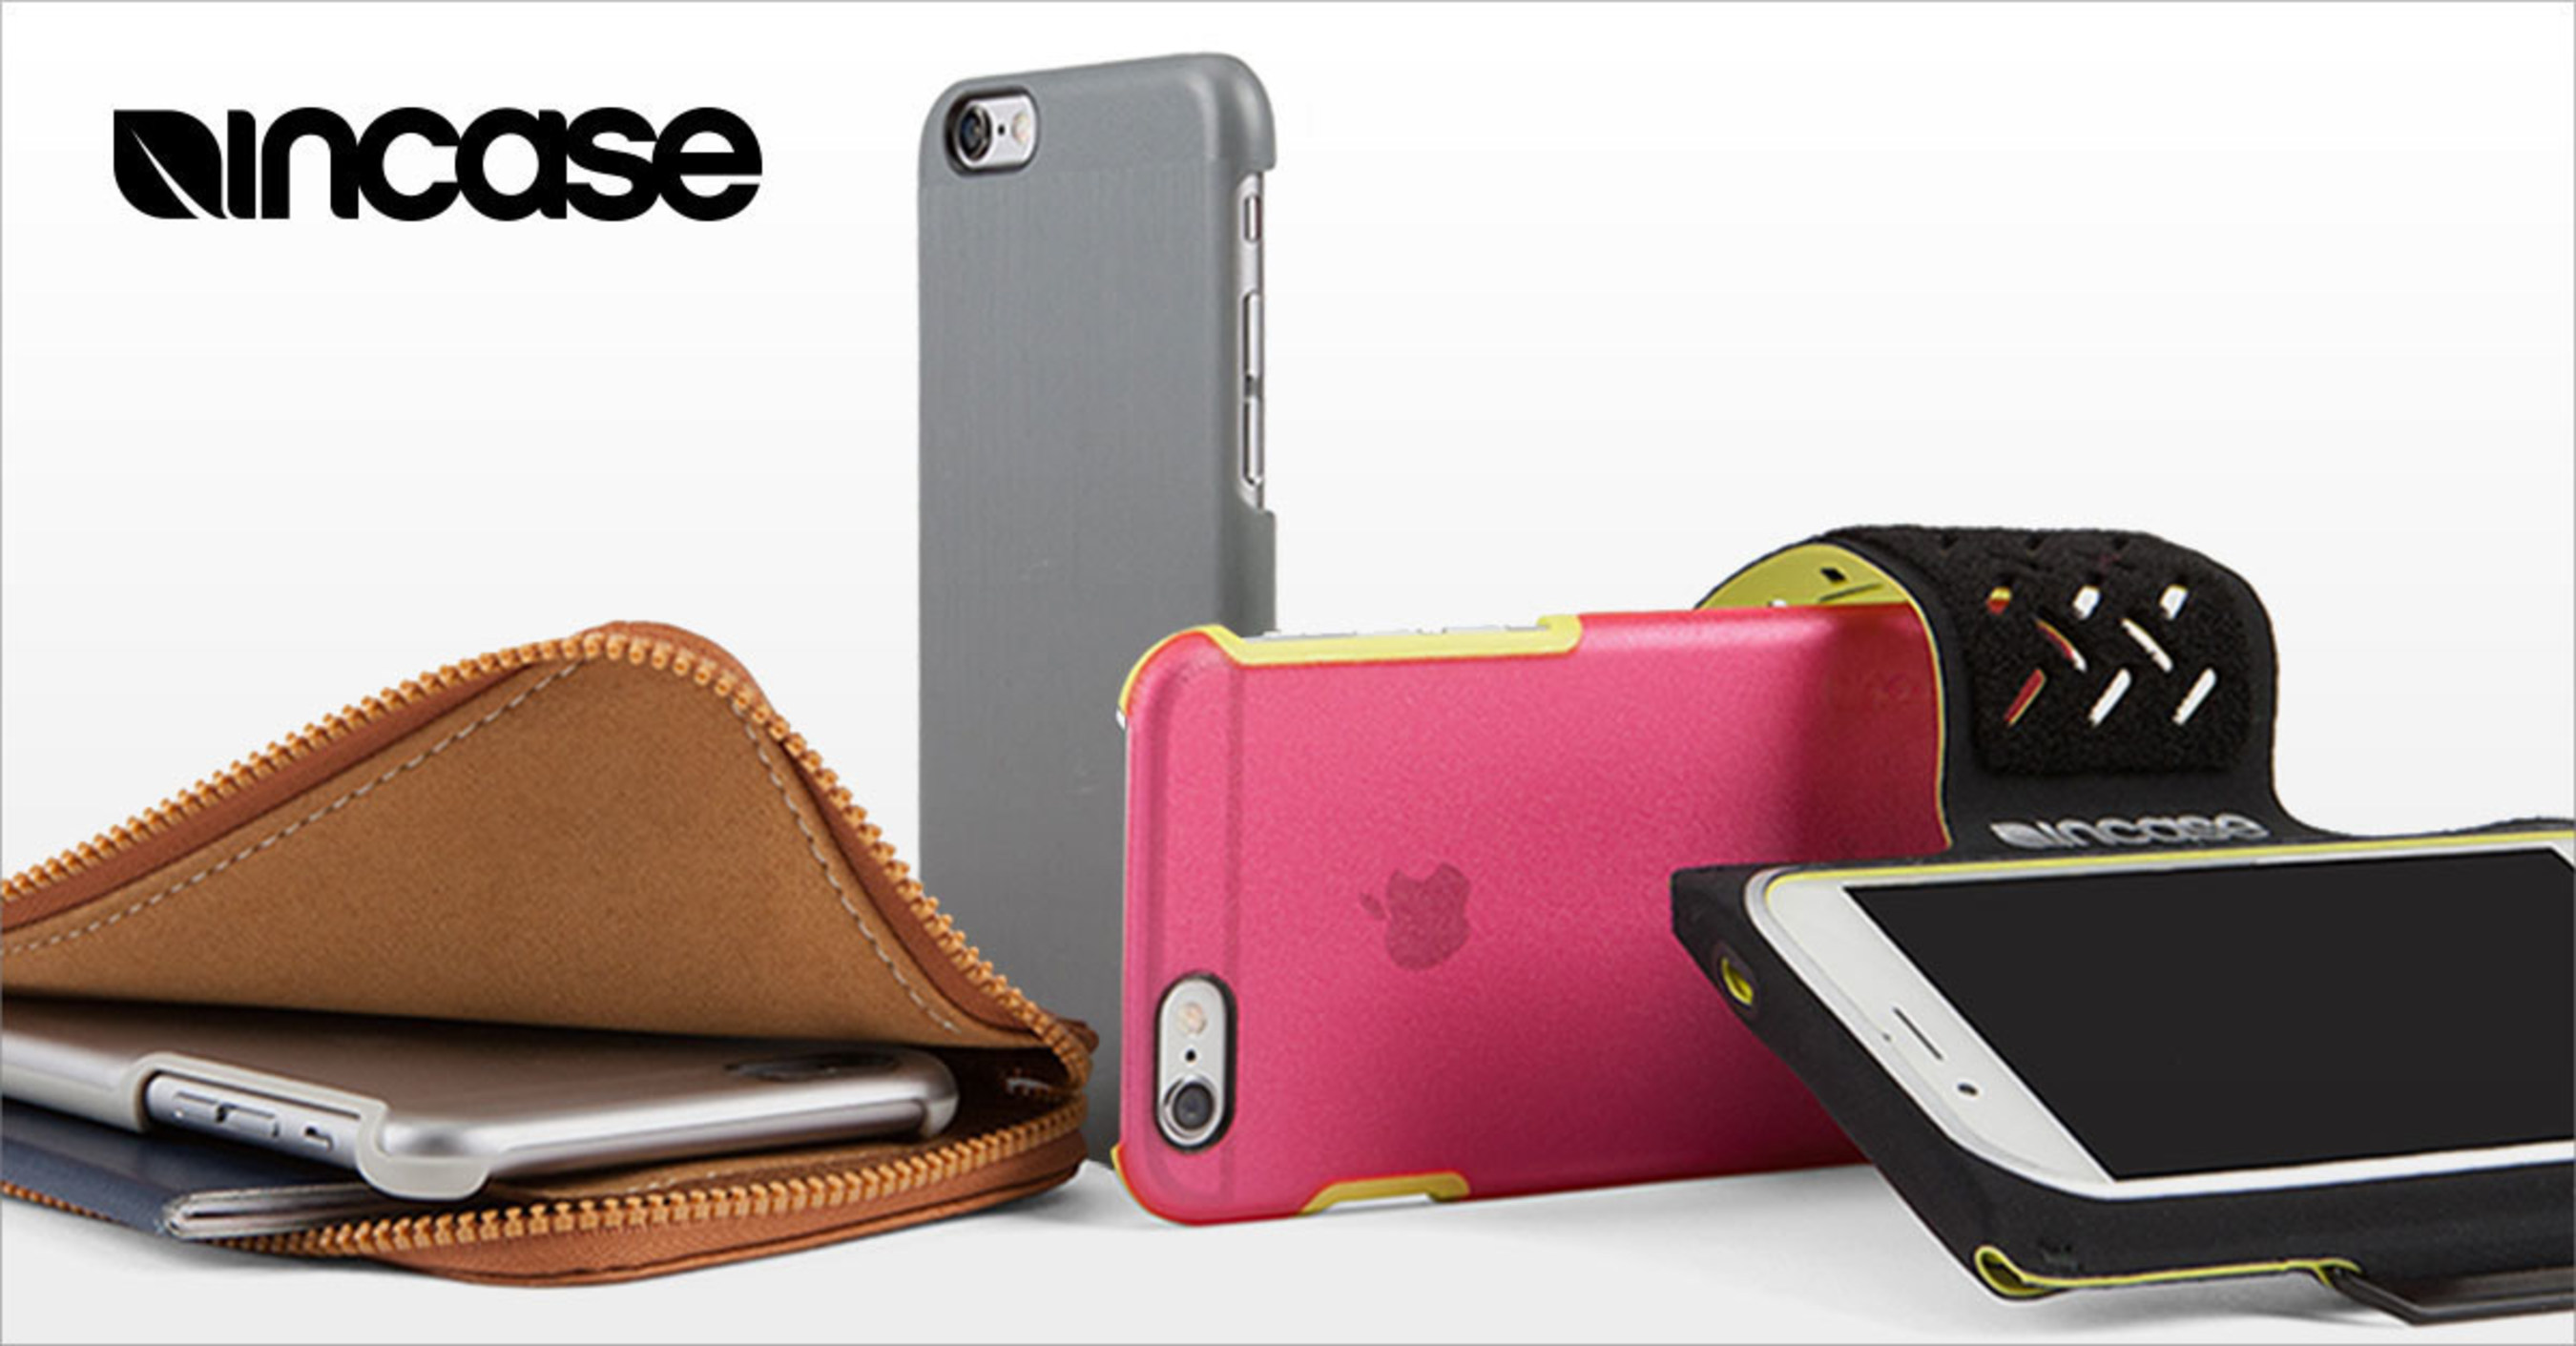 Incase launches new iPhone 6 case collection for holiday season